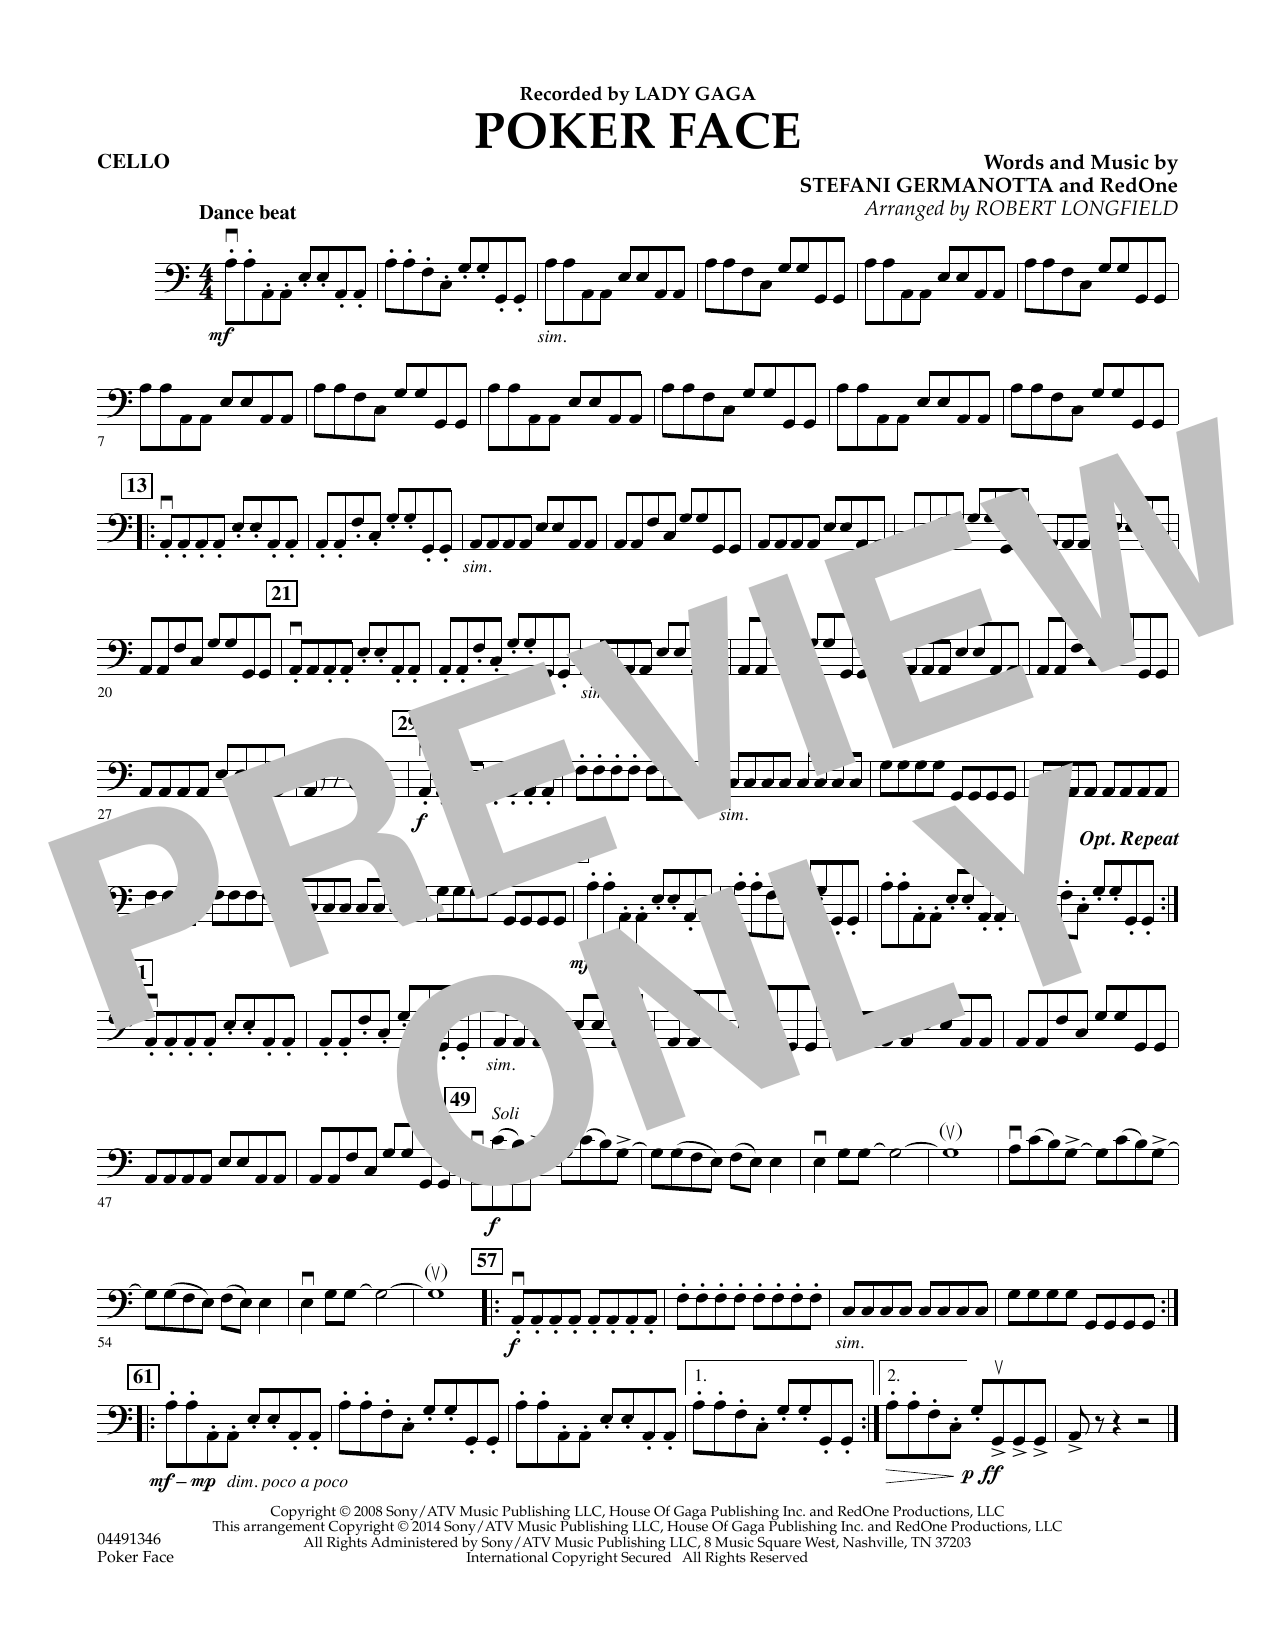 Robert Longfield Poker Face - Cello sheet music notes and chords. Download Printable PDF.